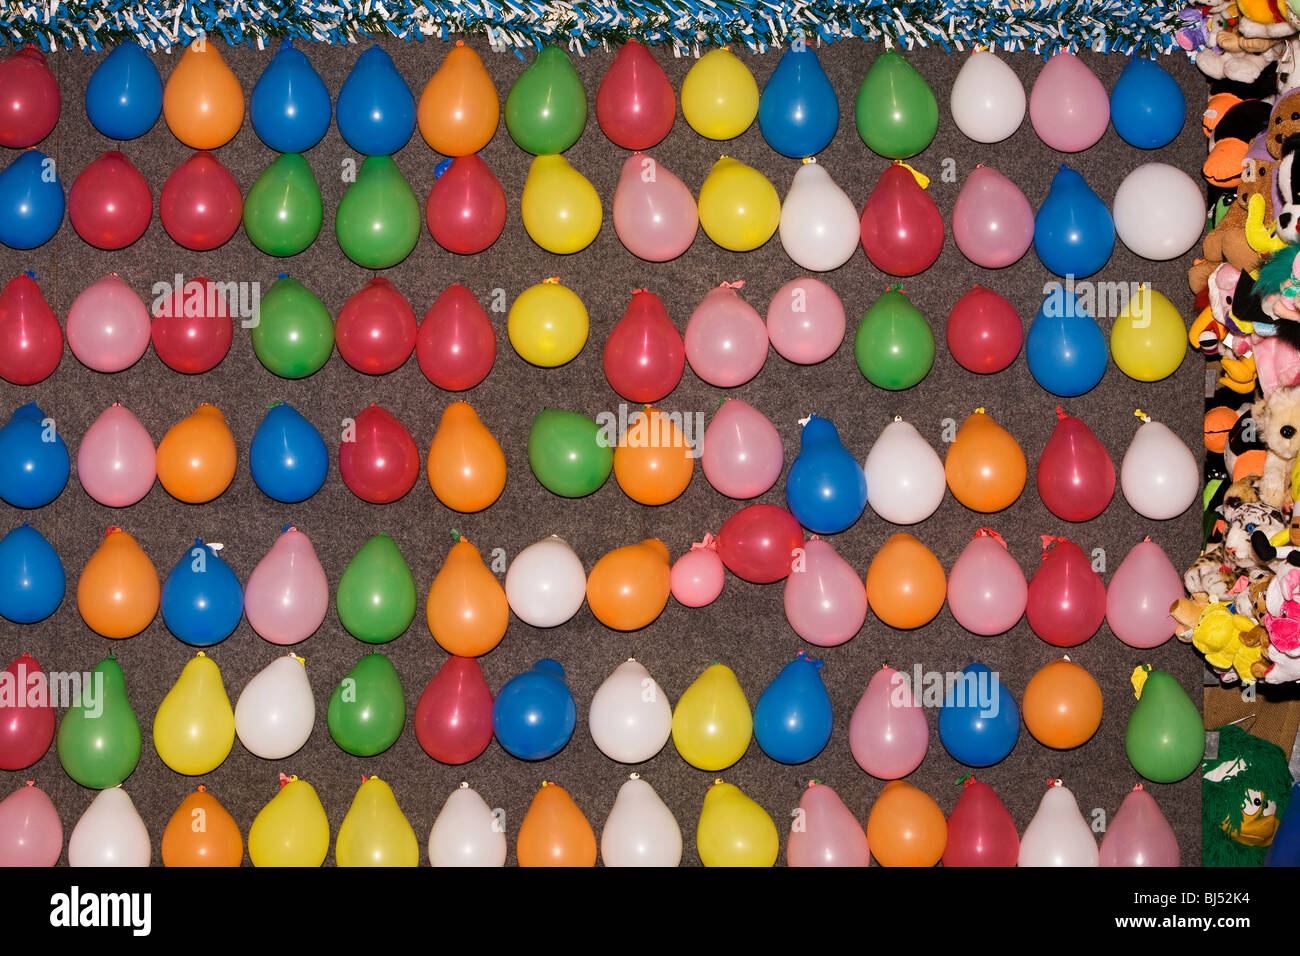 Balloons in a shooting gallery Stock Photo